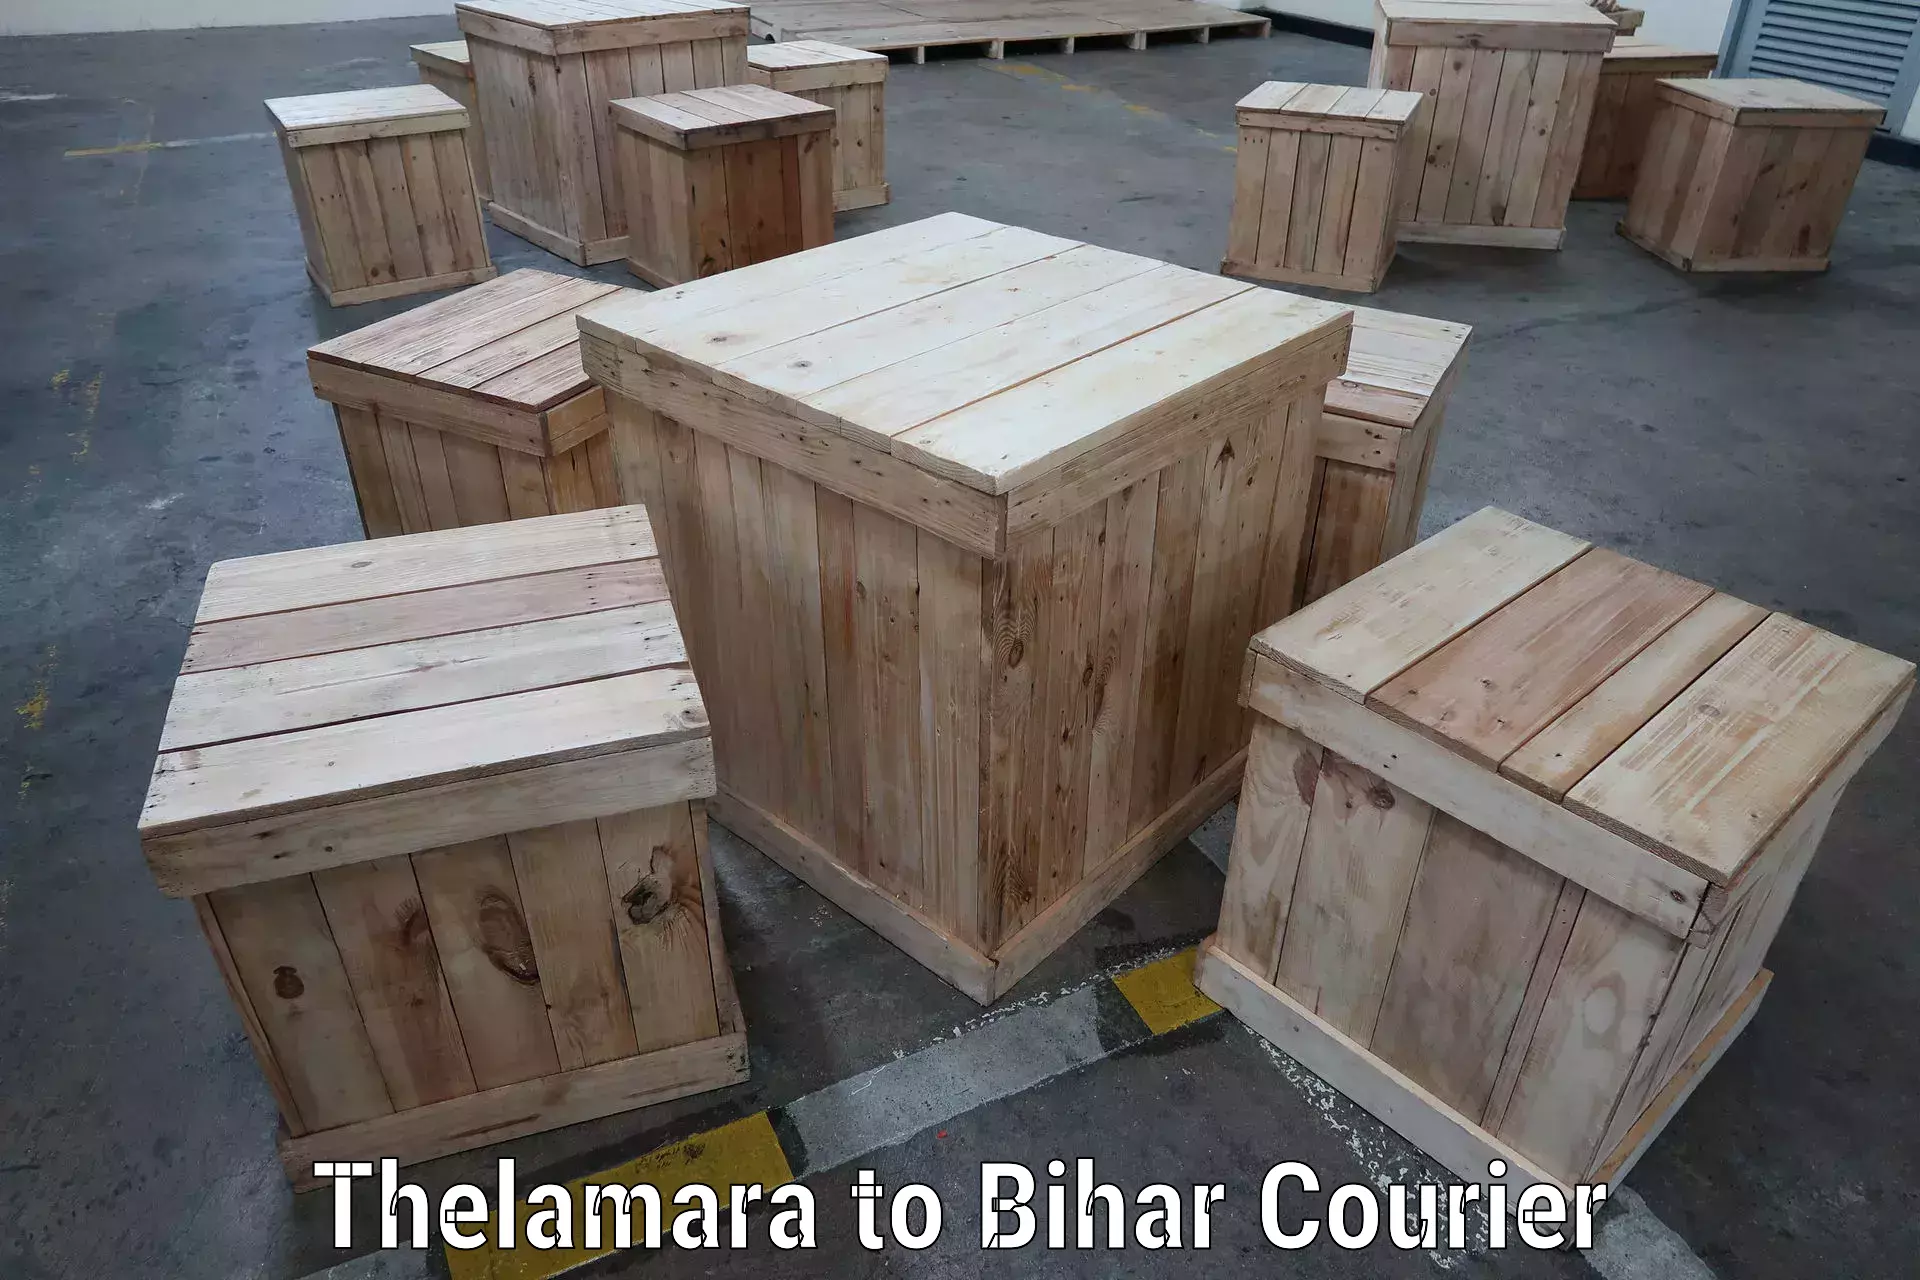 On-call courier service Thelamara to Kamtaul